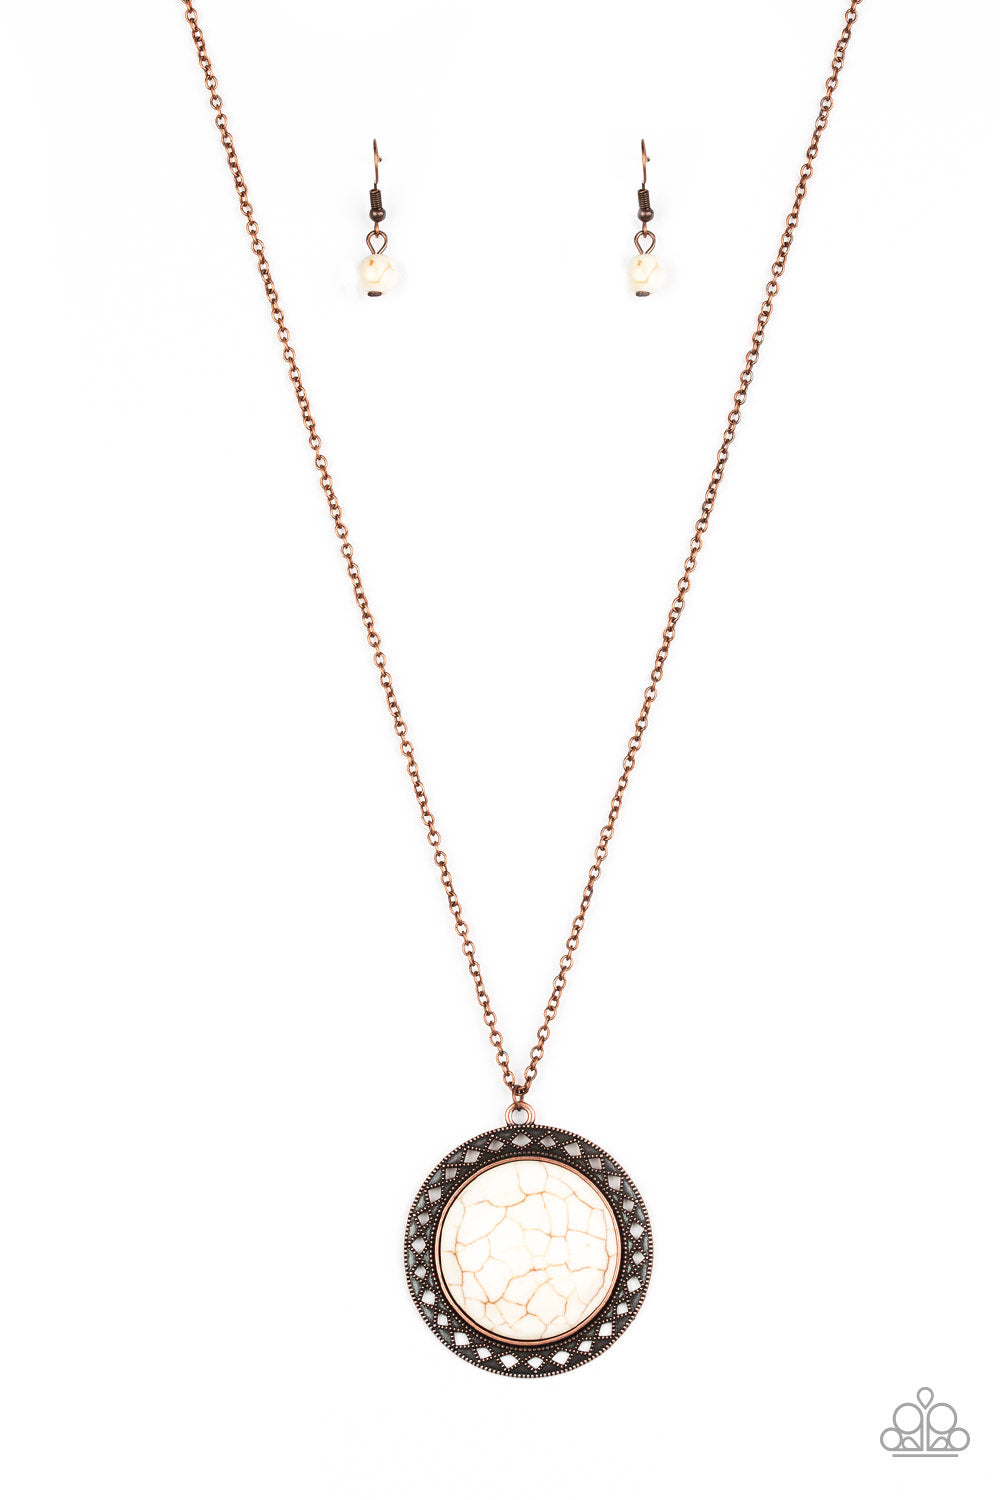 Paparazzi Accessories  - Run Out Of Rodeo #L144 - Copper Necklace